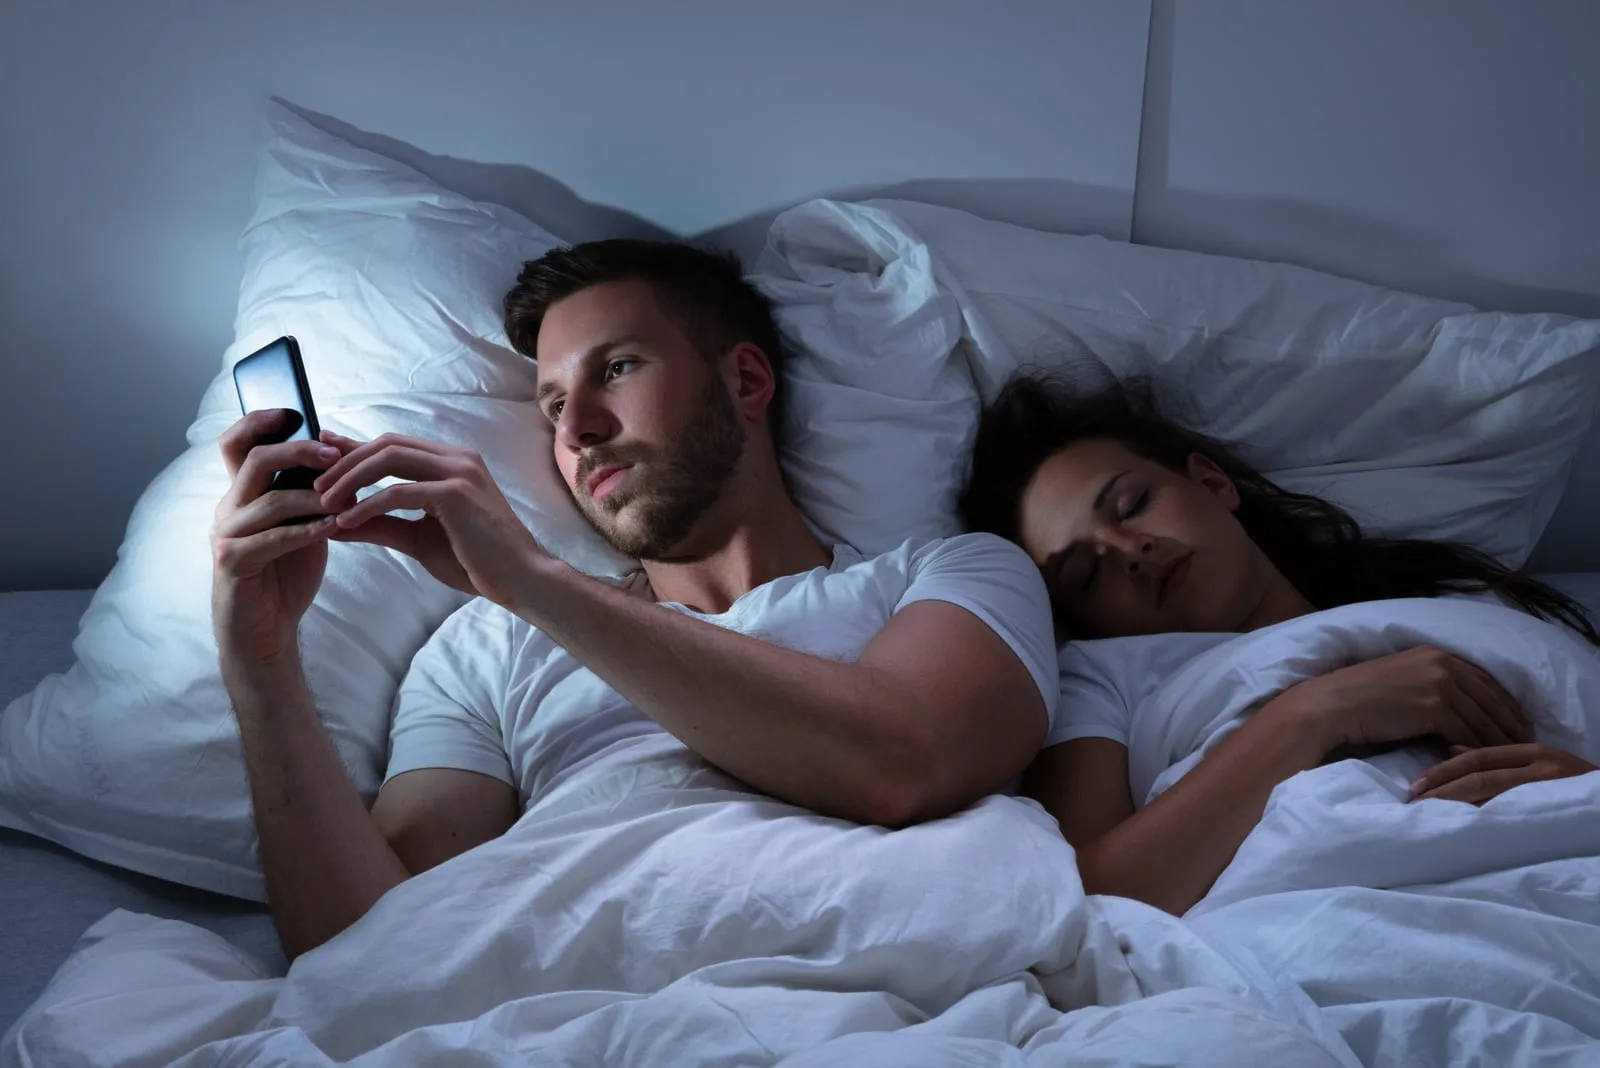 man typing in bed while woman sleeping